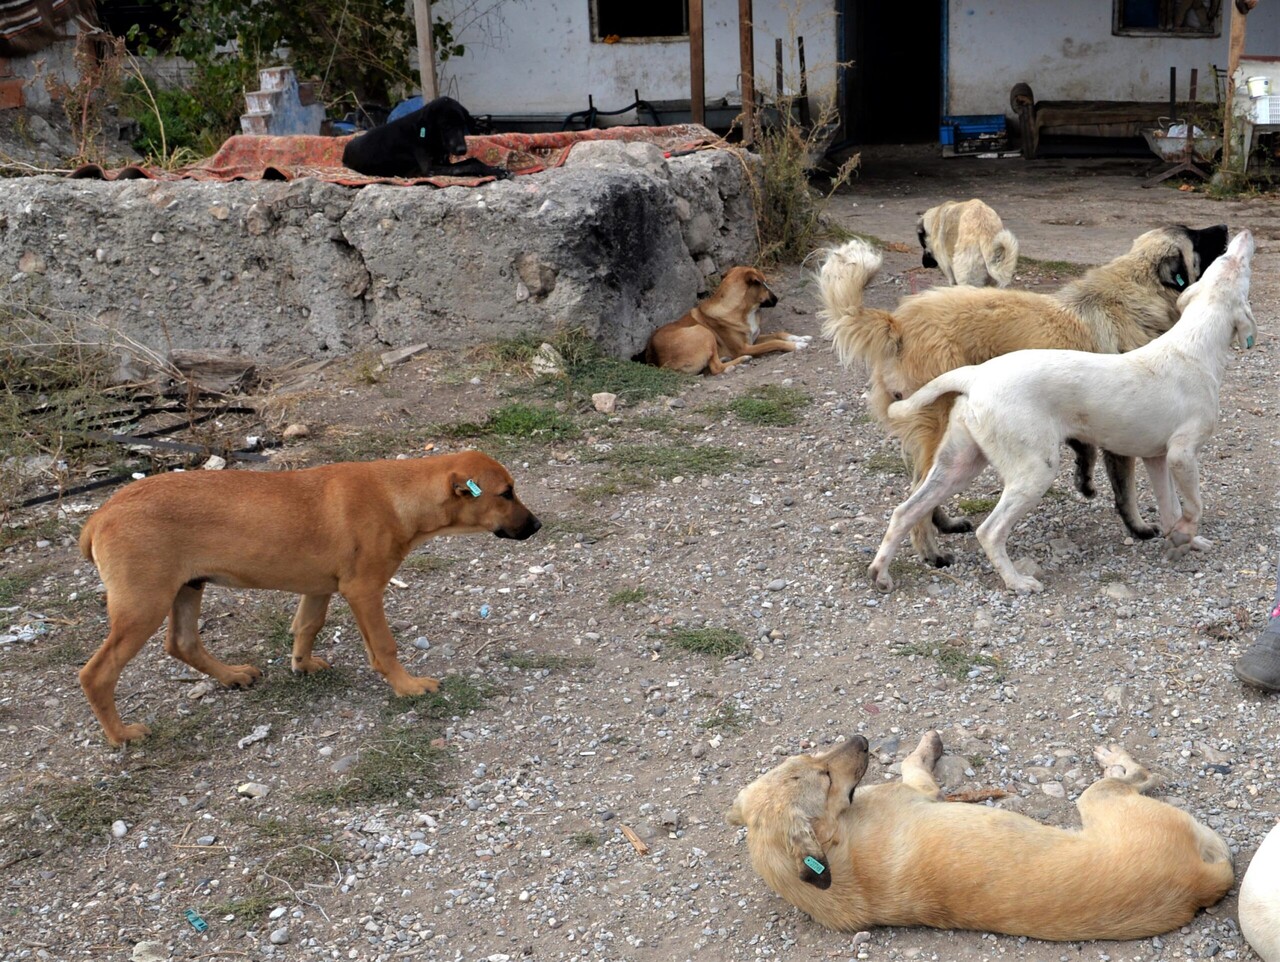 Türkiye to implement strict new regulations on stray dogs amid rising attacks